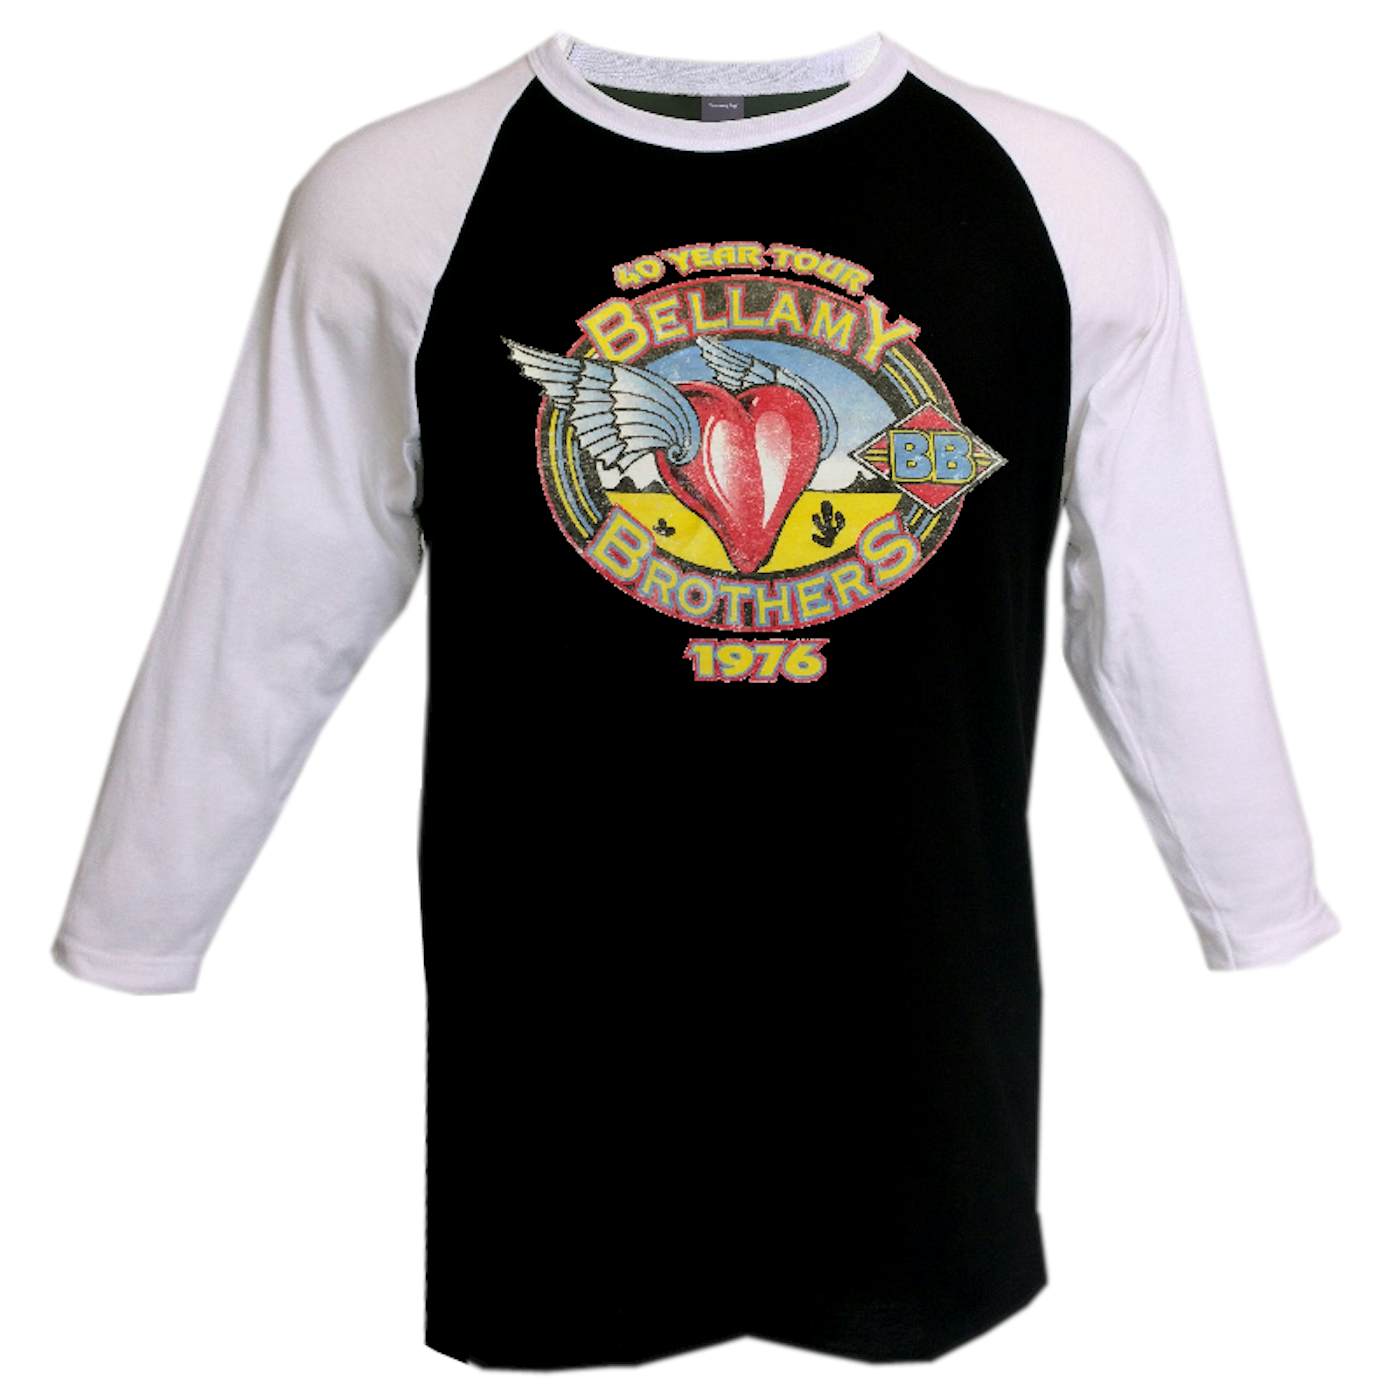 The Bellamy Brothers Black and White Raglan 40 Year Tour Tee